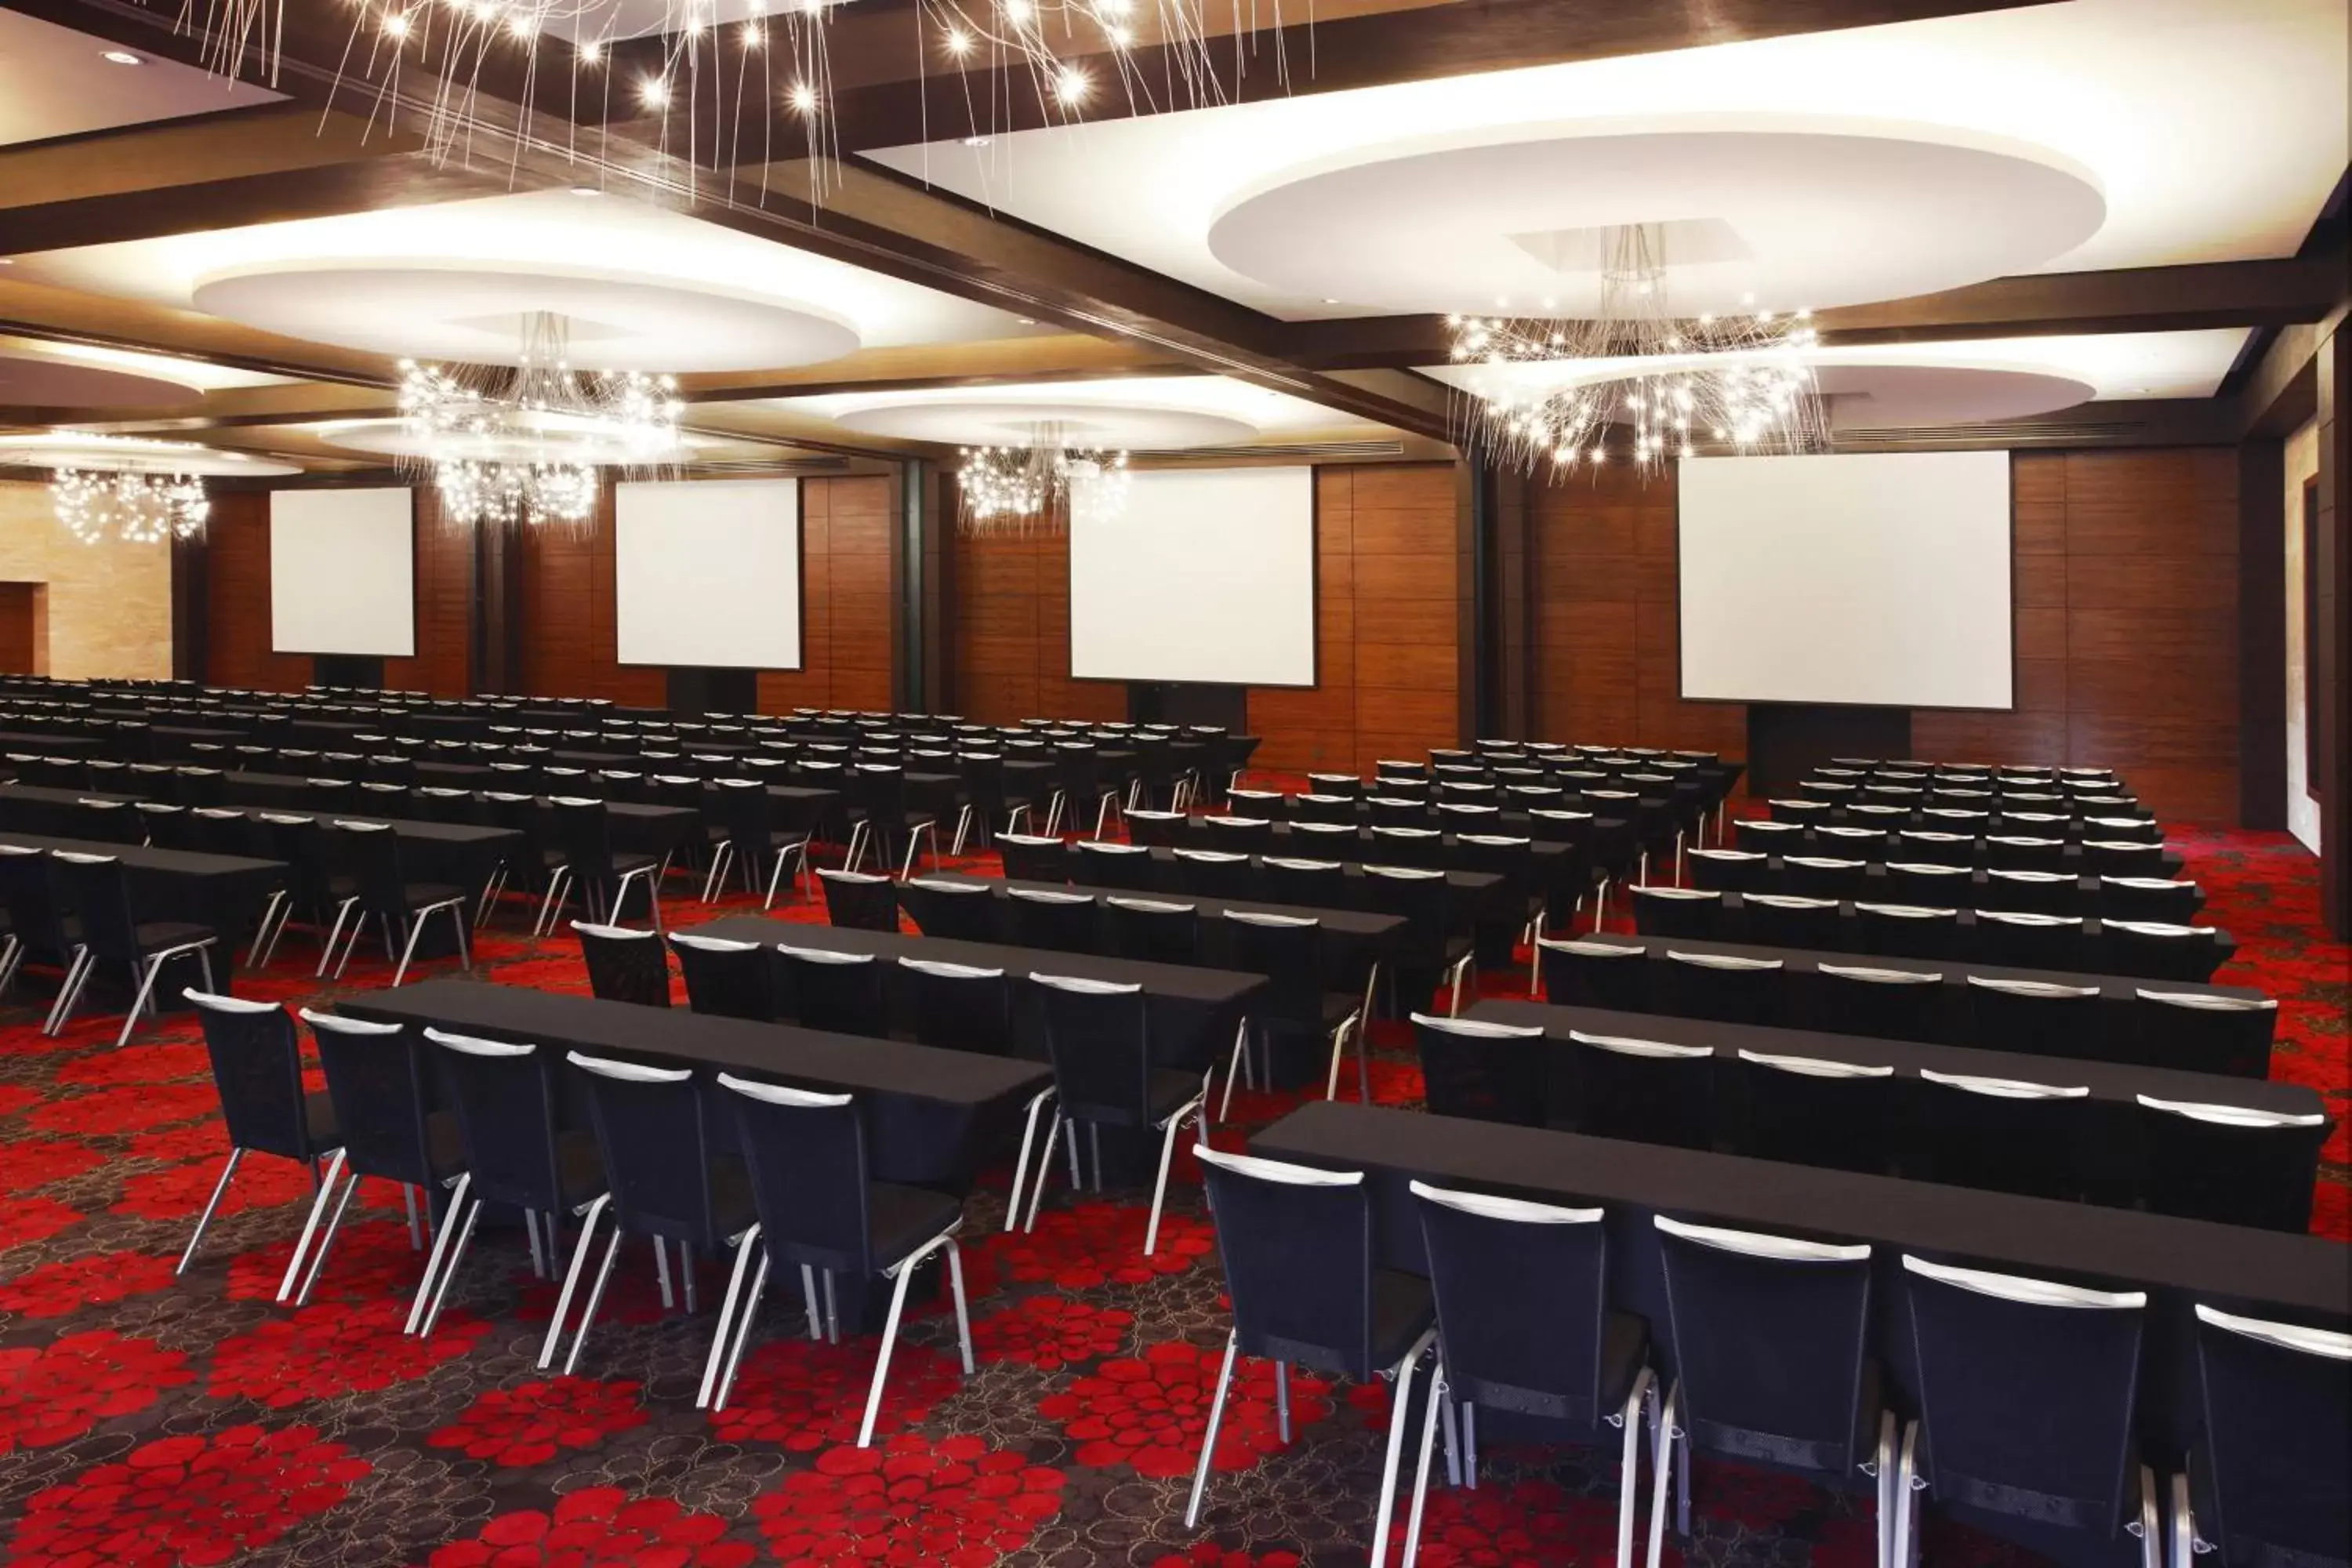 Meeting/conference room in JW Marriott Hotel Mexico City Santa Fe